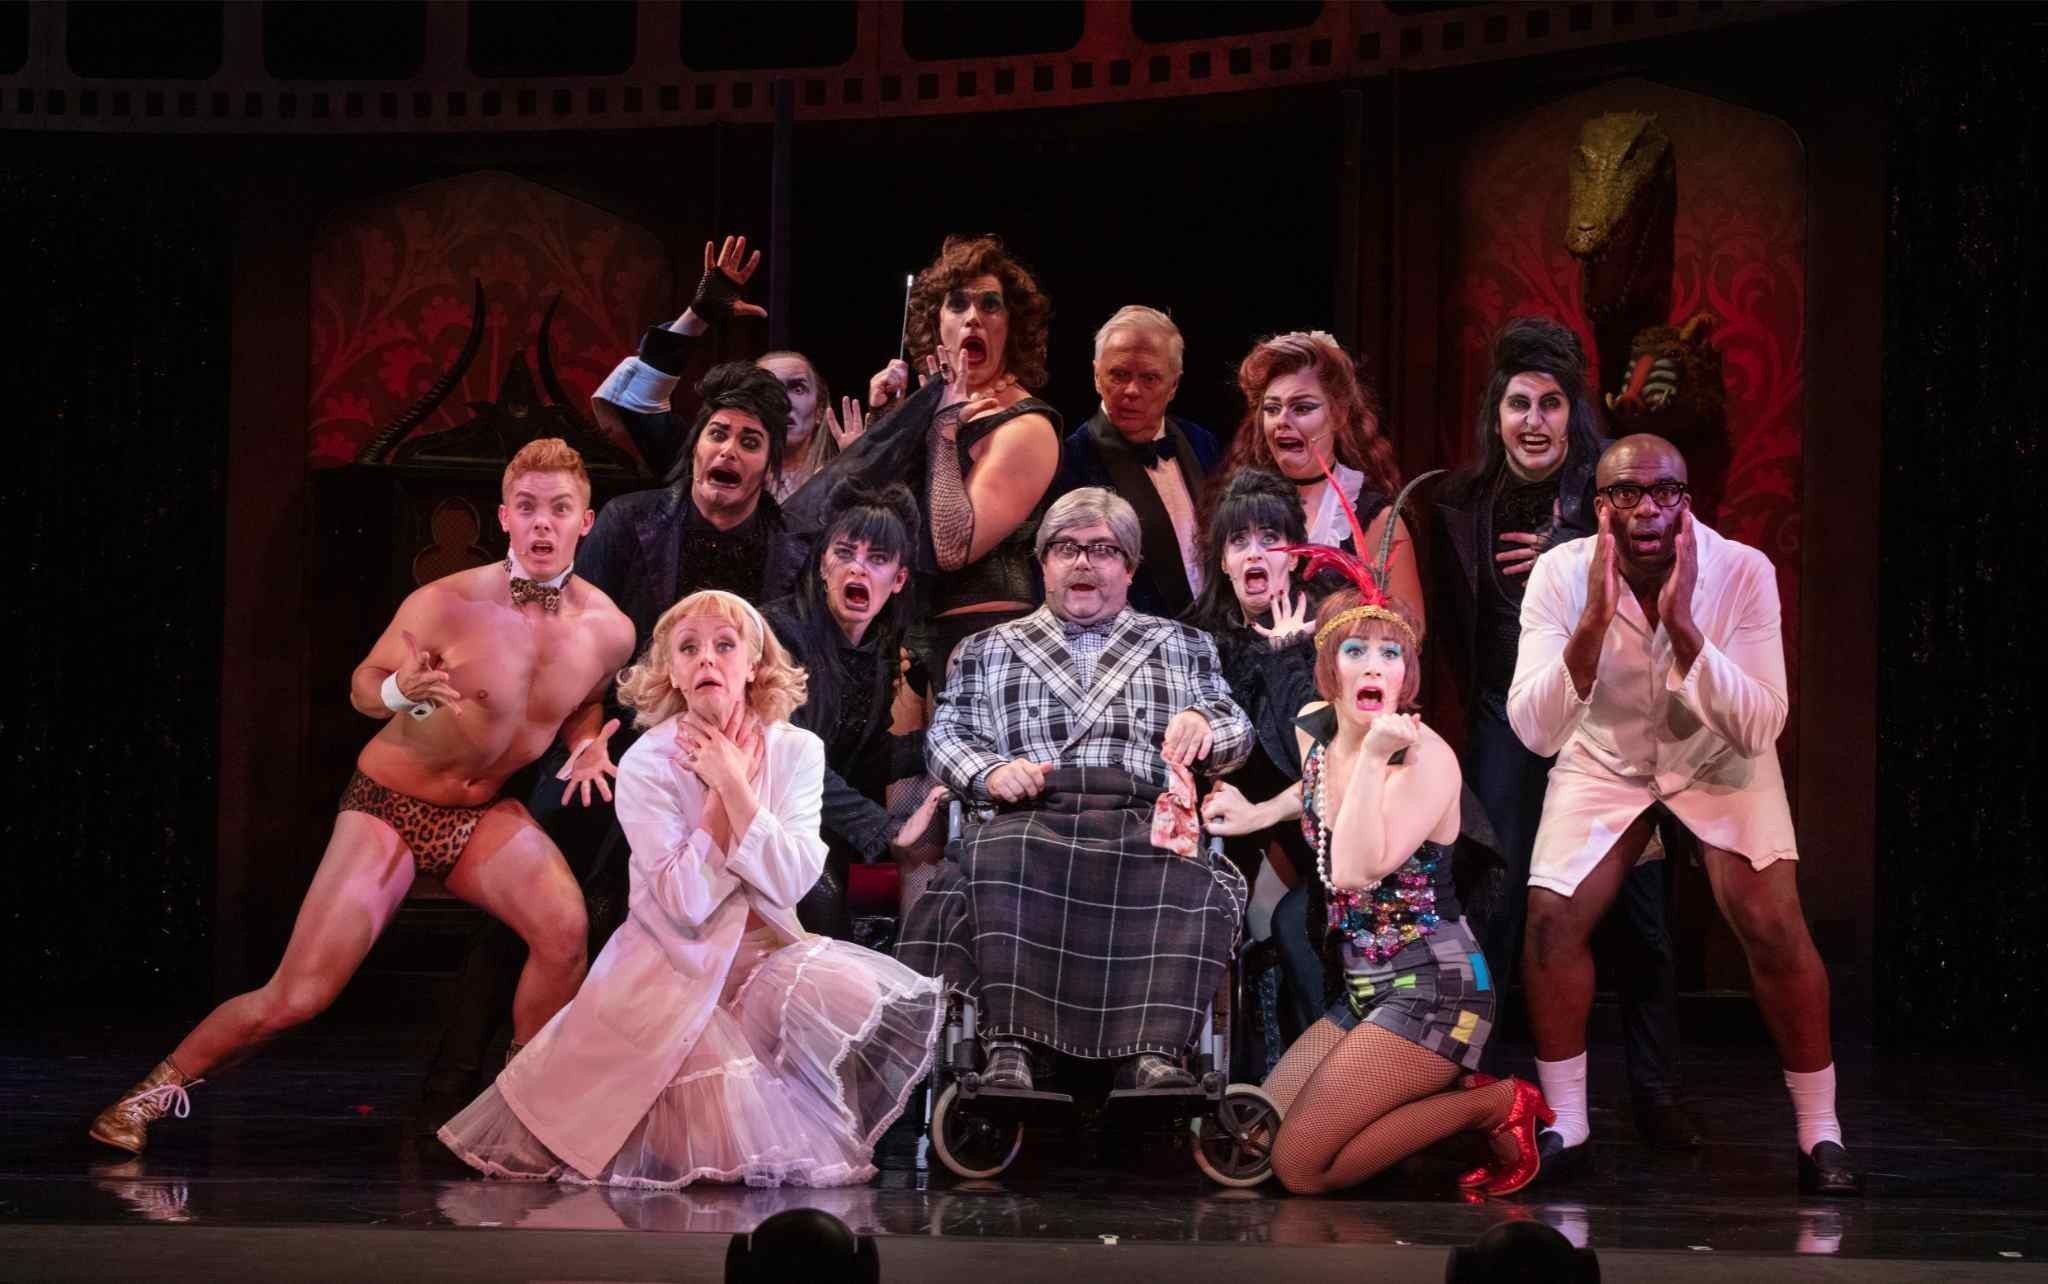 The Rocky Horror Show comes to Shrewsbury's Theatre Severn!